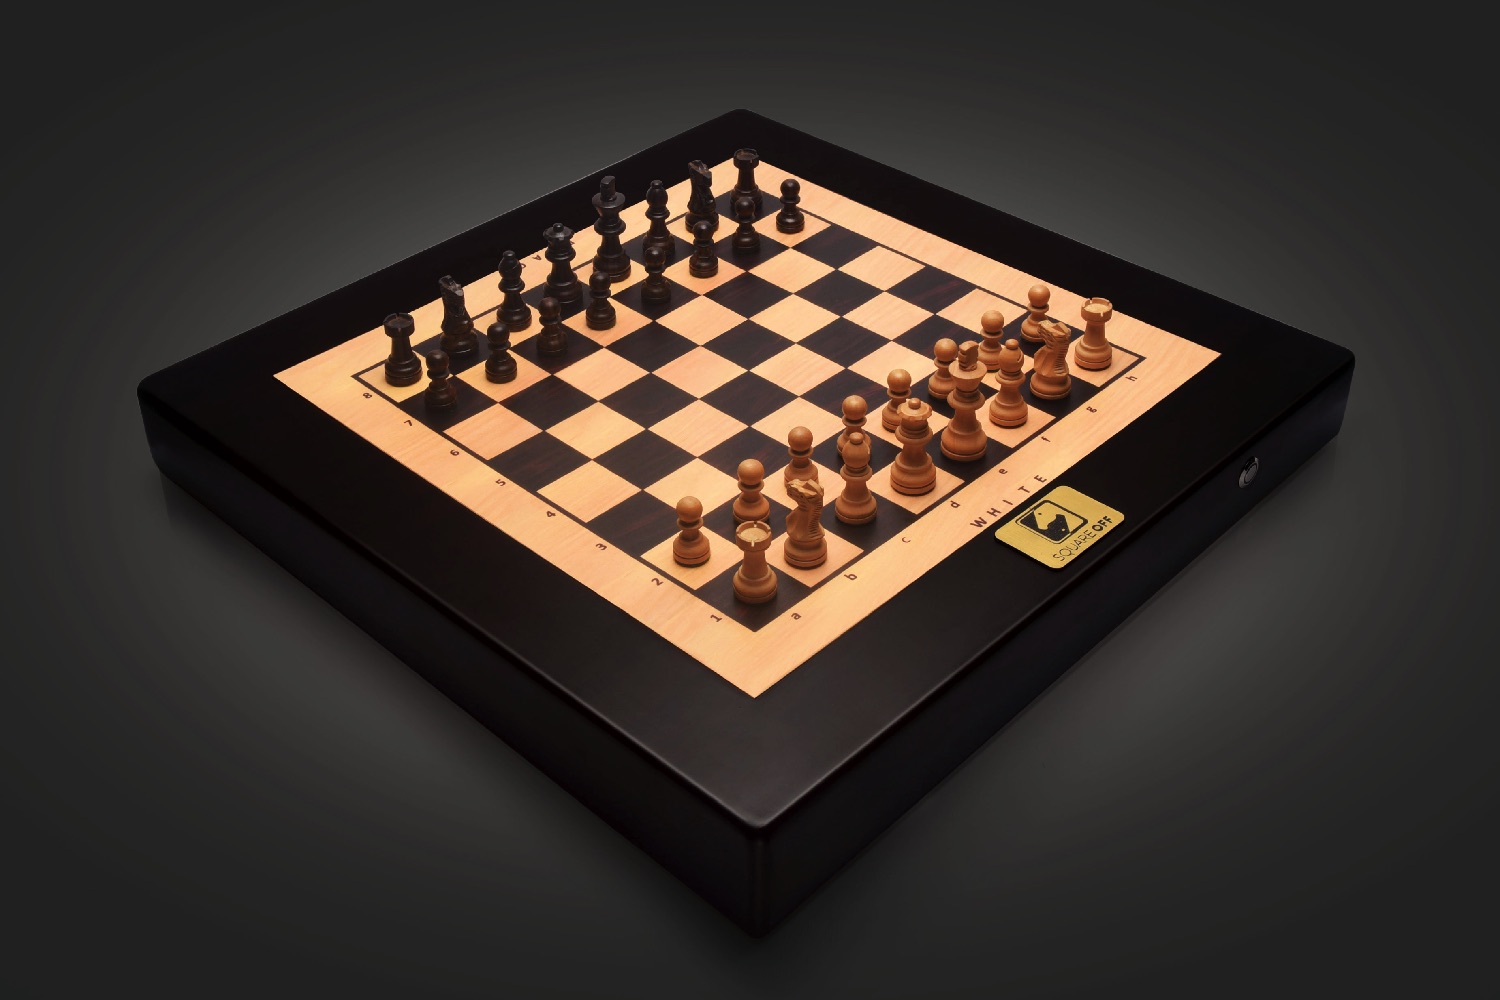 Awesome Kickstarter Chess Set Pieces Move On Their Own | Digital Trends